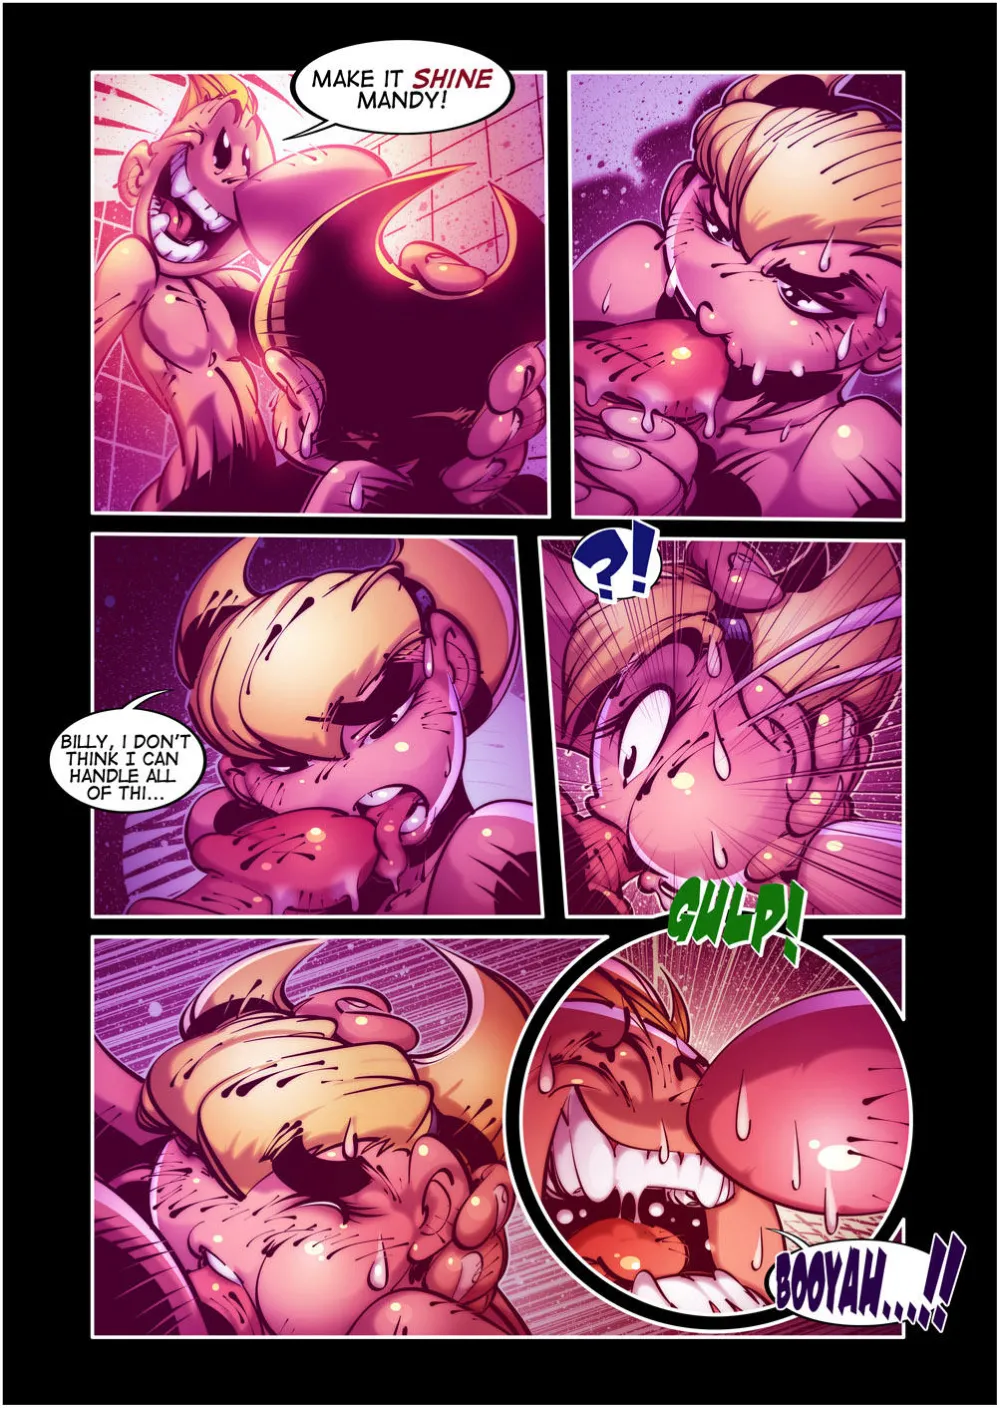 The Sexy Adventures of Billy & Mandy - Page 6